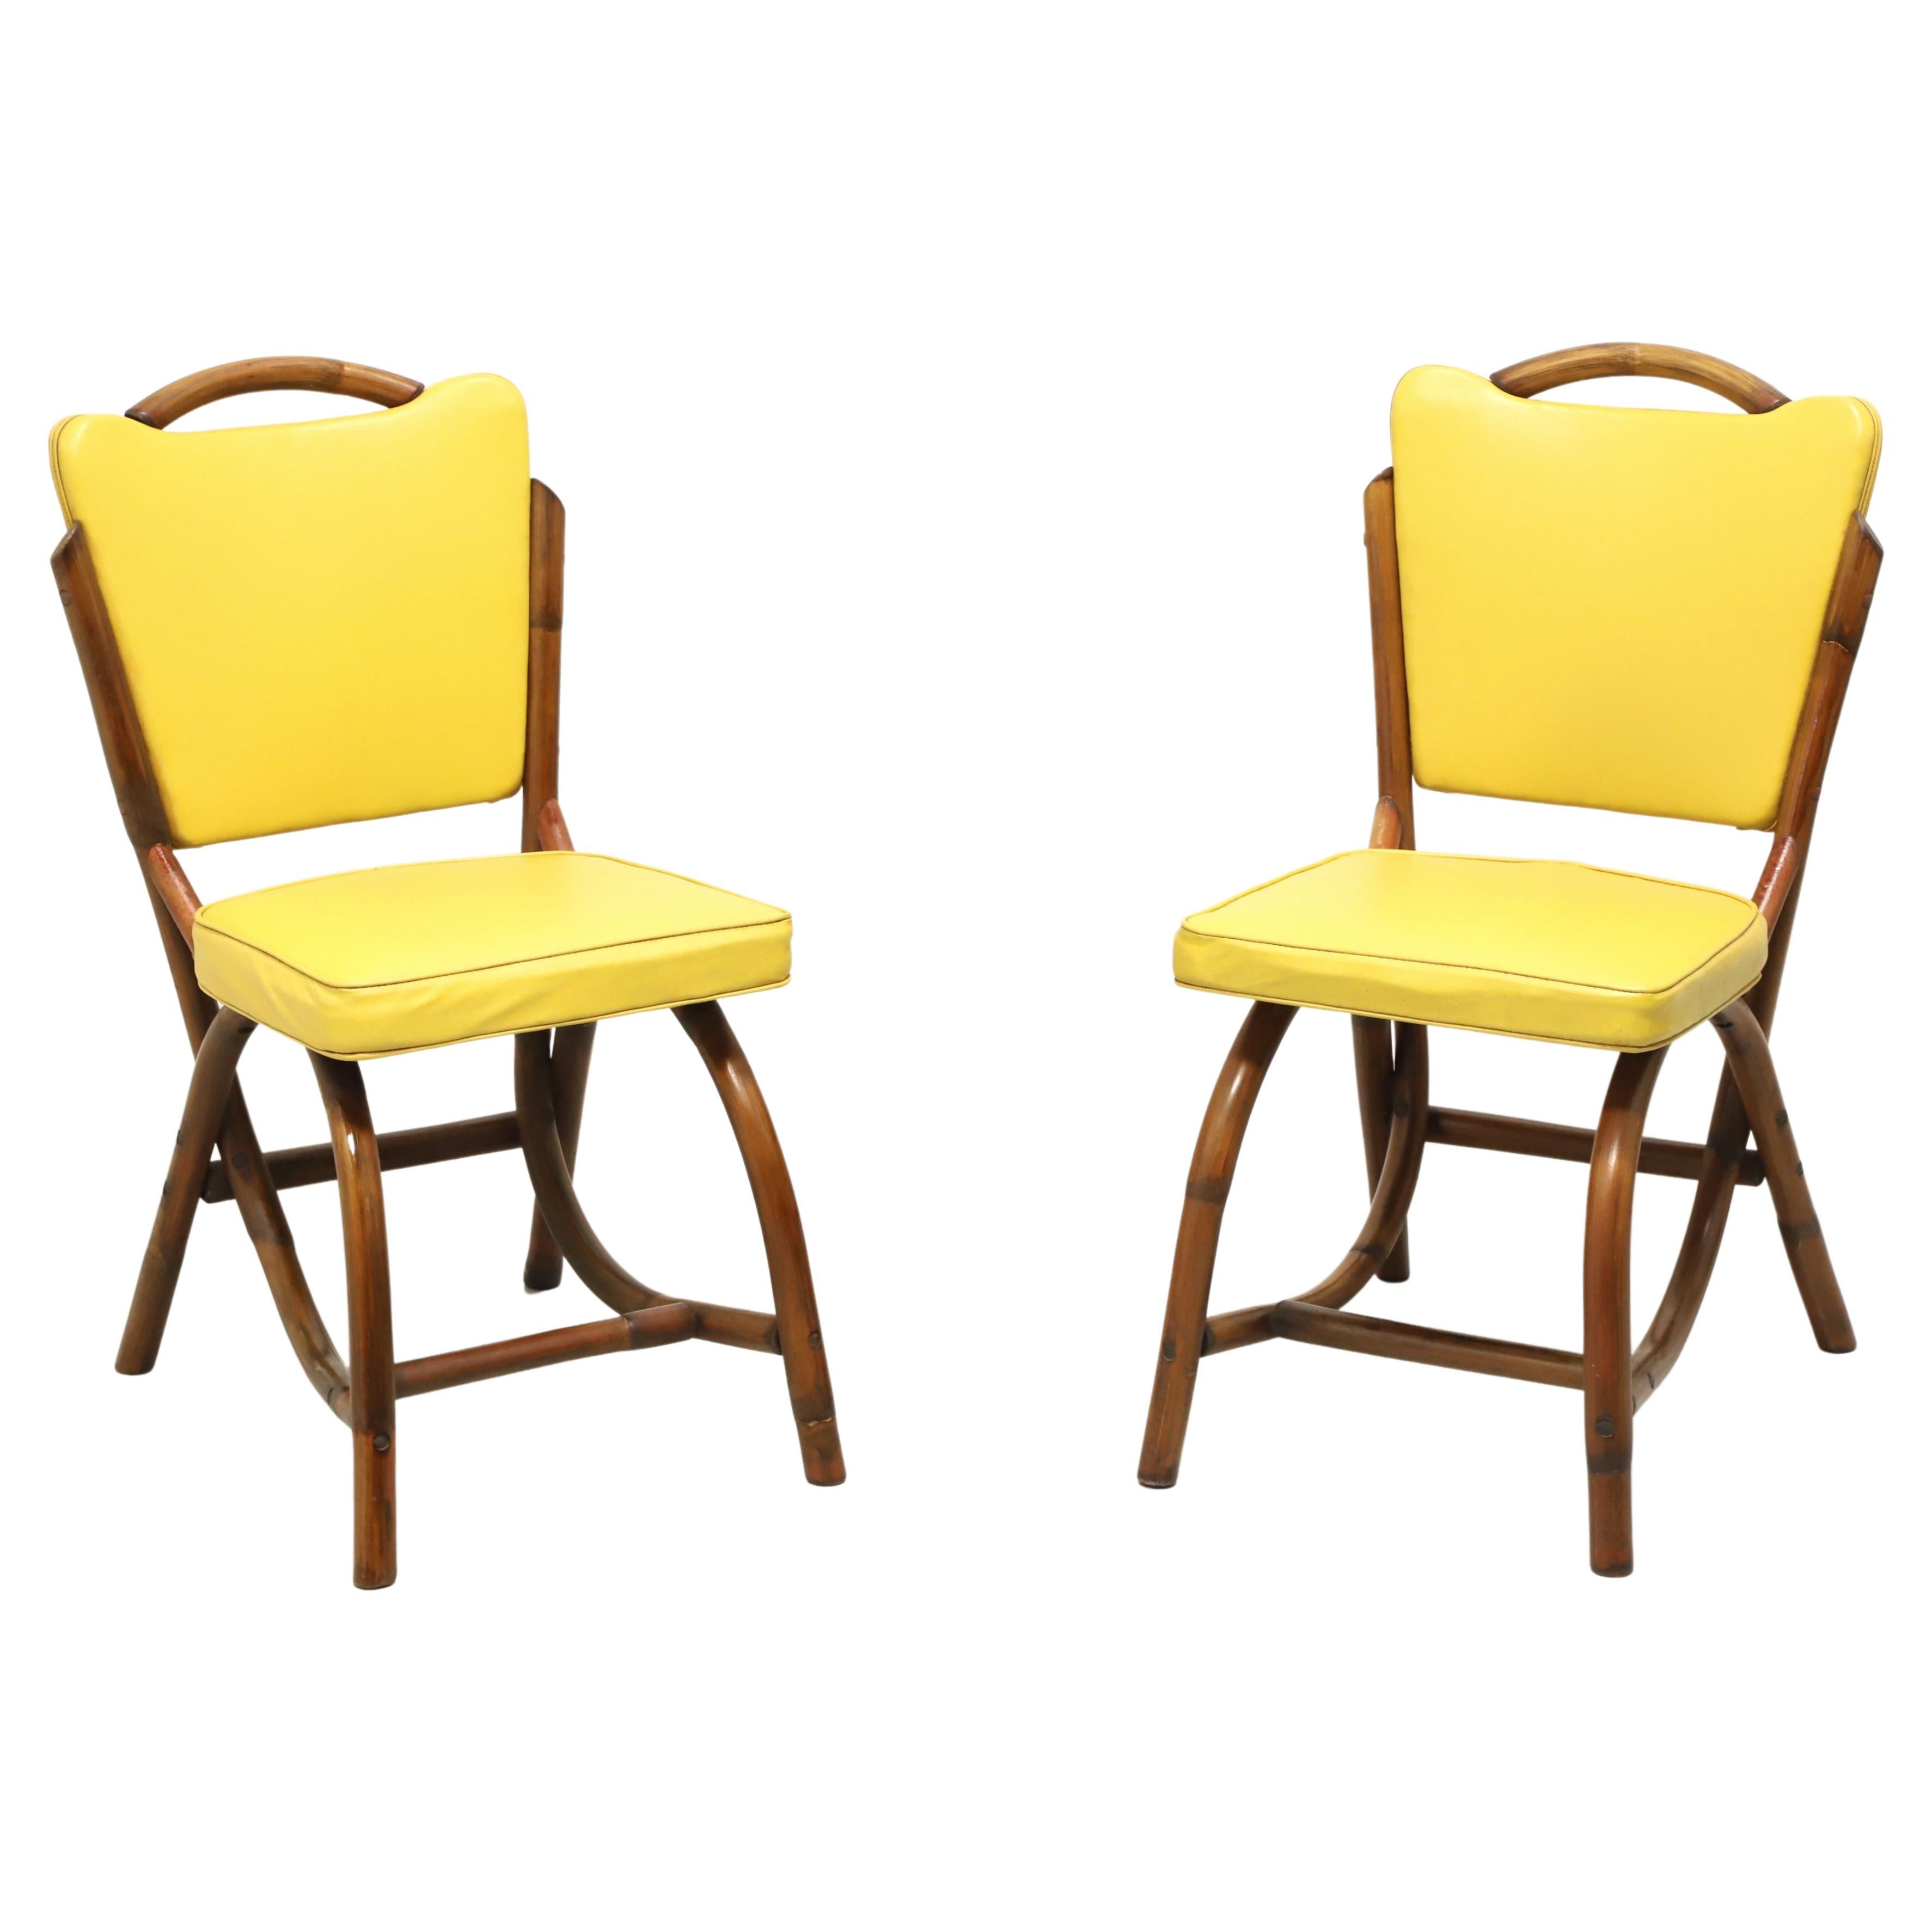 BAM-TAN 1960's Rattan Dining Side Chairs - Pair A For Sale